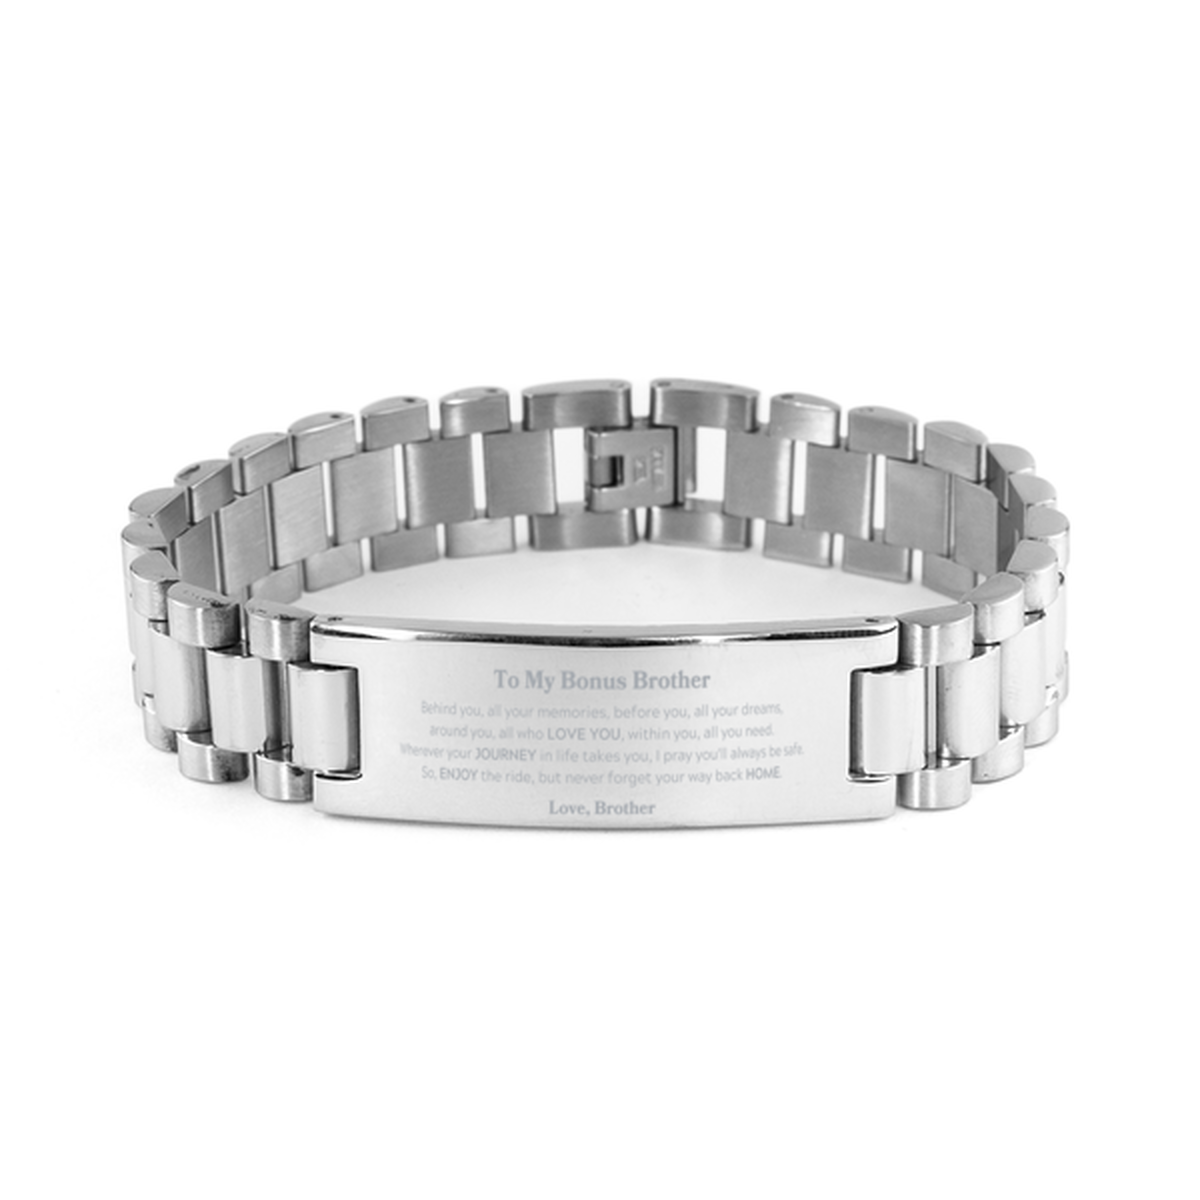 To My Bonus Brother Graduation Gifts from Brother, Bonus Brother Ladder Stainless Steel Bracelet Christmas Birthday Gifts for Bonus Brother Behind you, all your memories, before you, all your dreams. Love, Brother